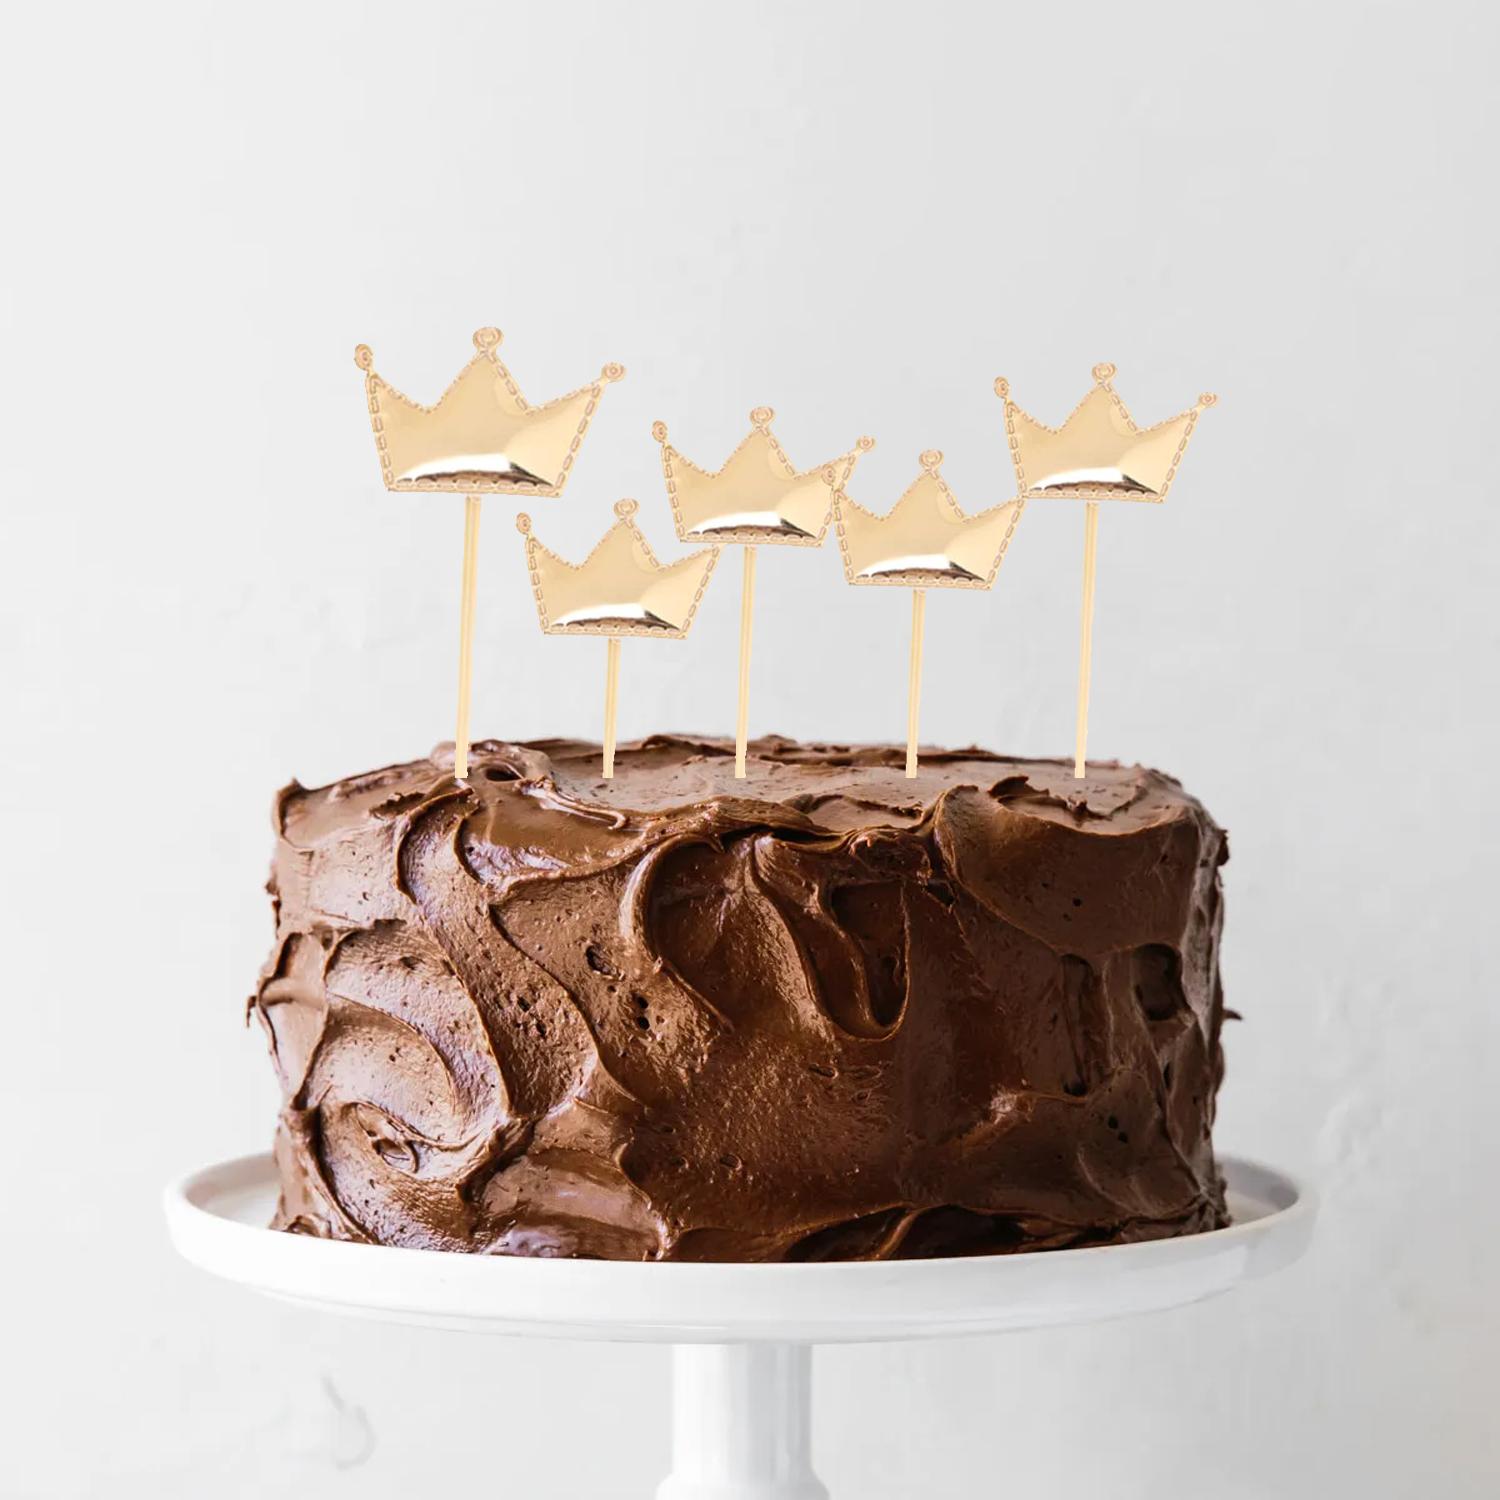 SET OF 5 GOLD CROWN TOPPERS